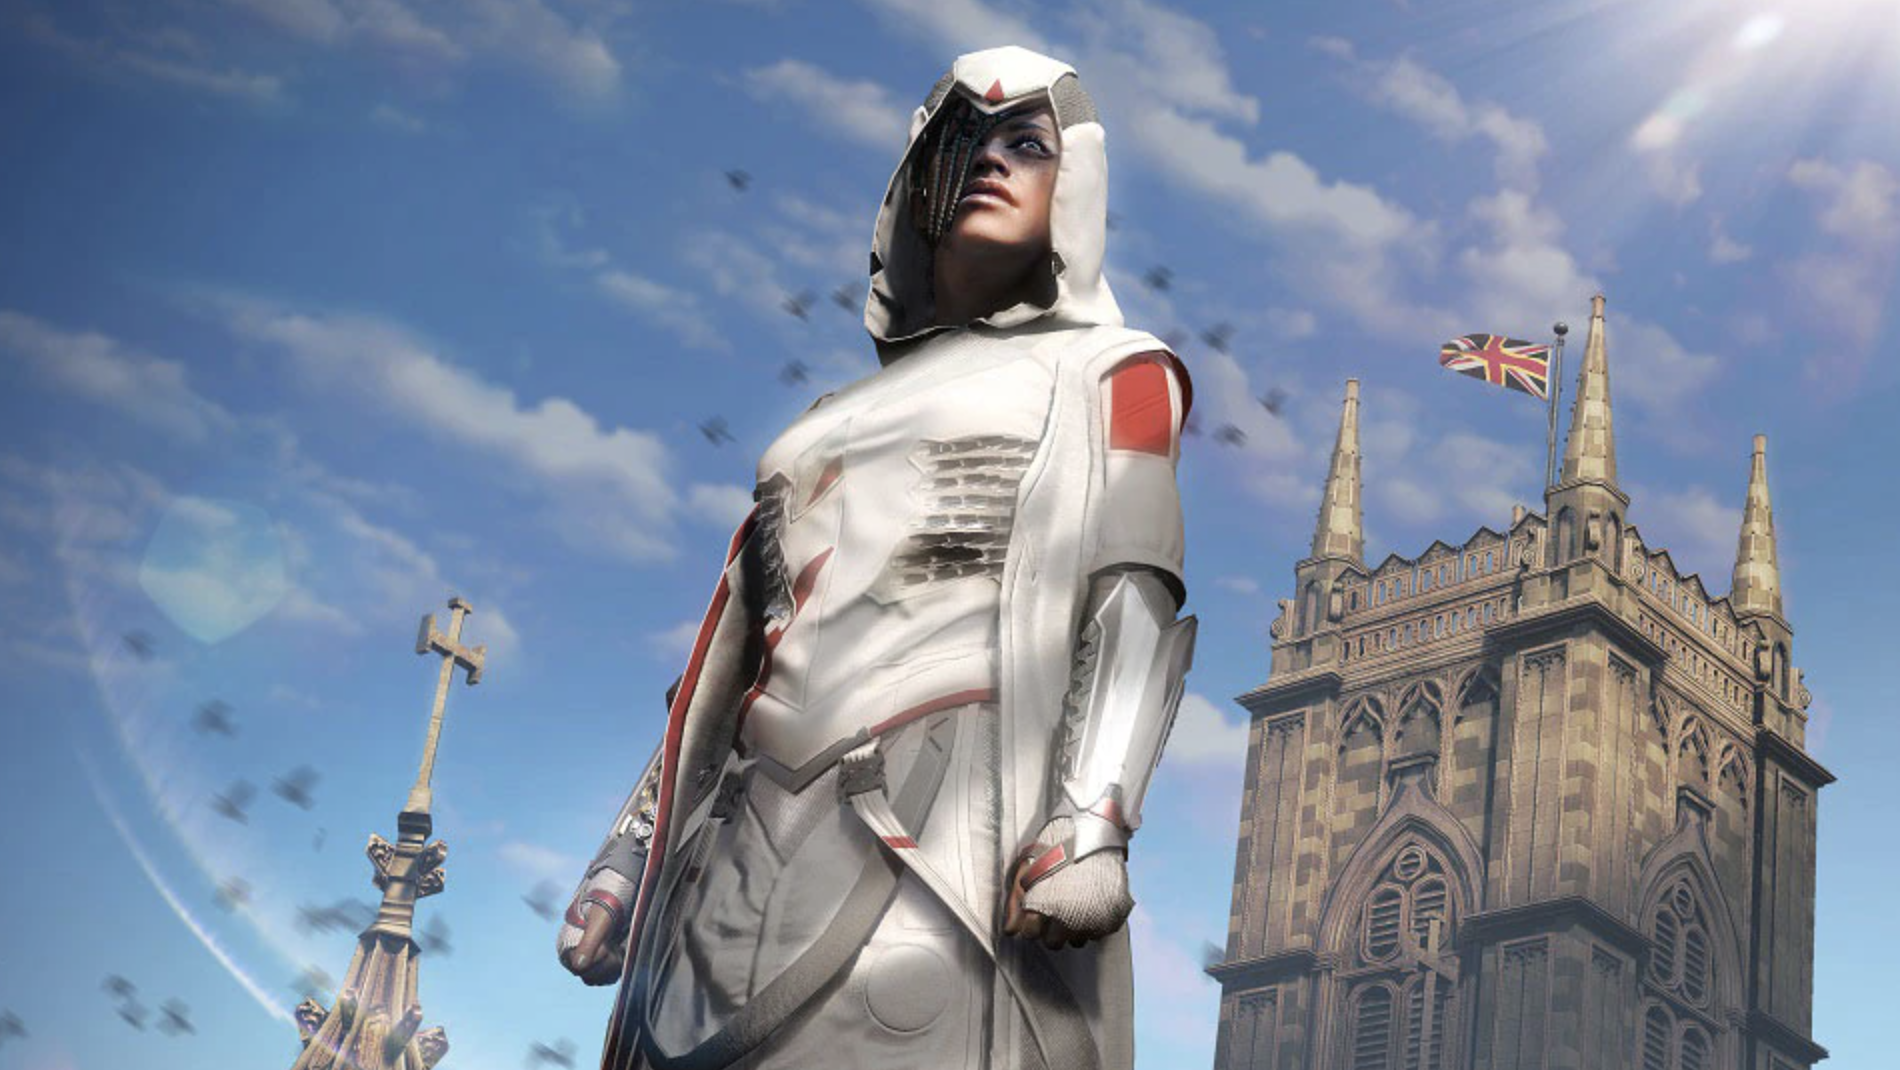 Video game image of a character dressed in white robes, standing in front of Big Ben.